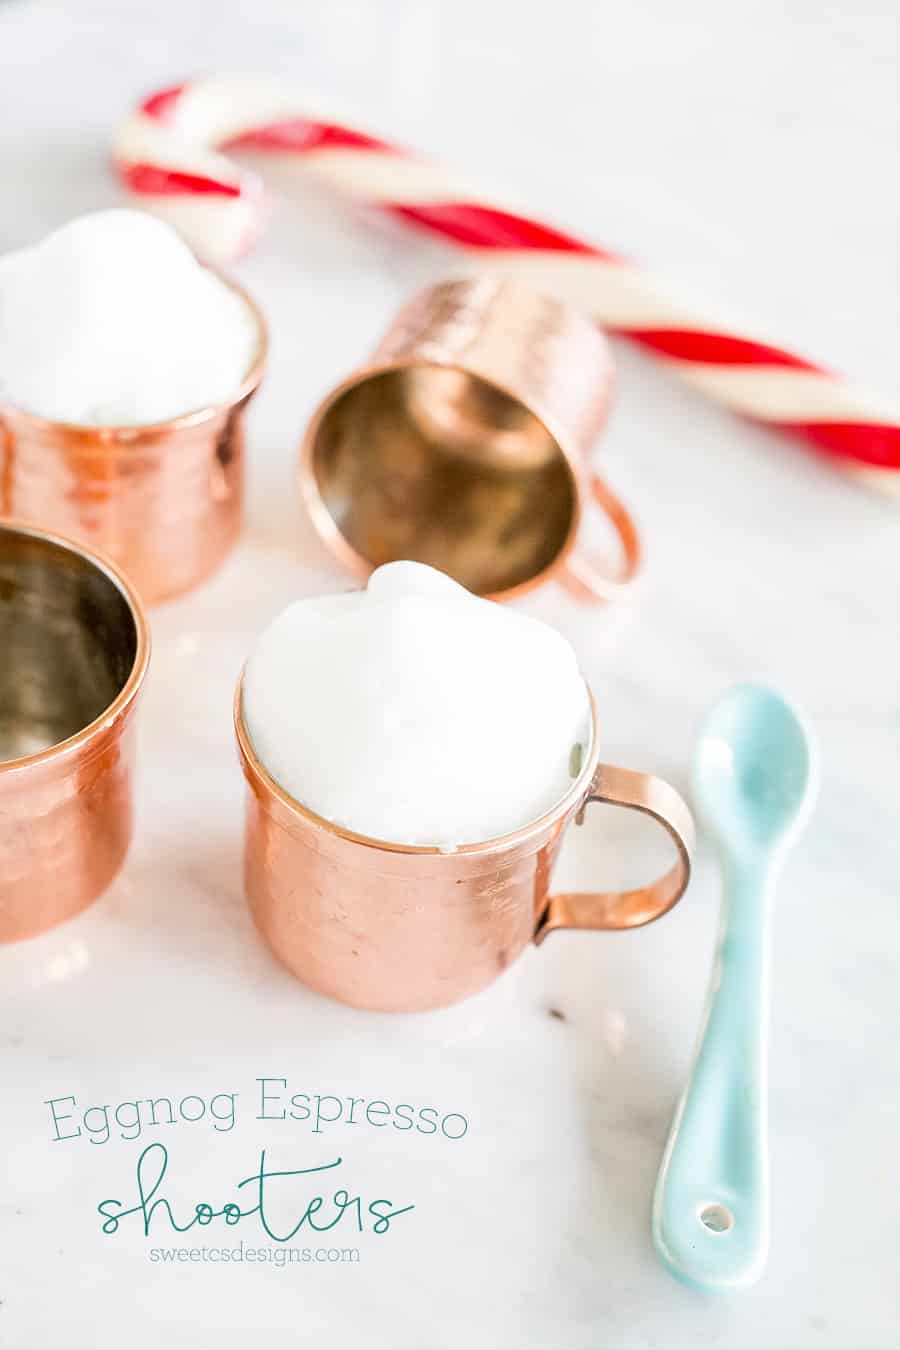 Eggnog espresso shooters- delicious and perfect for parties!